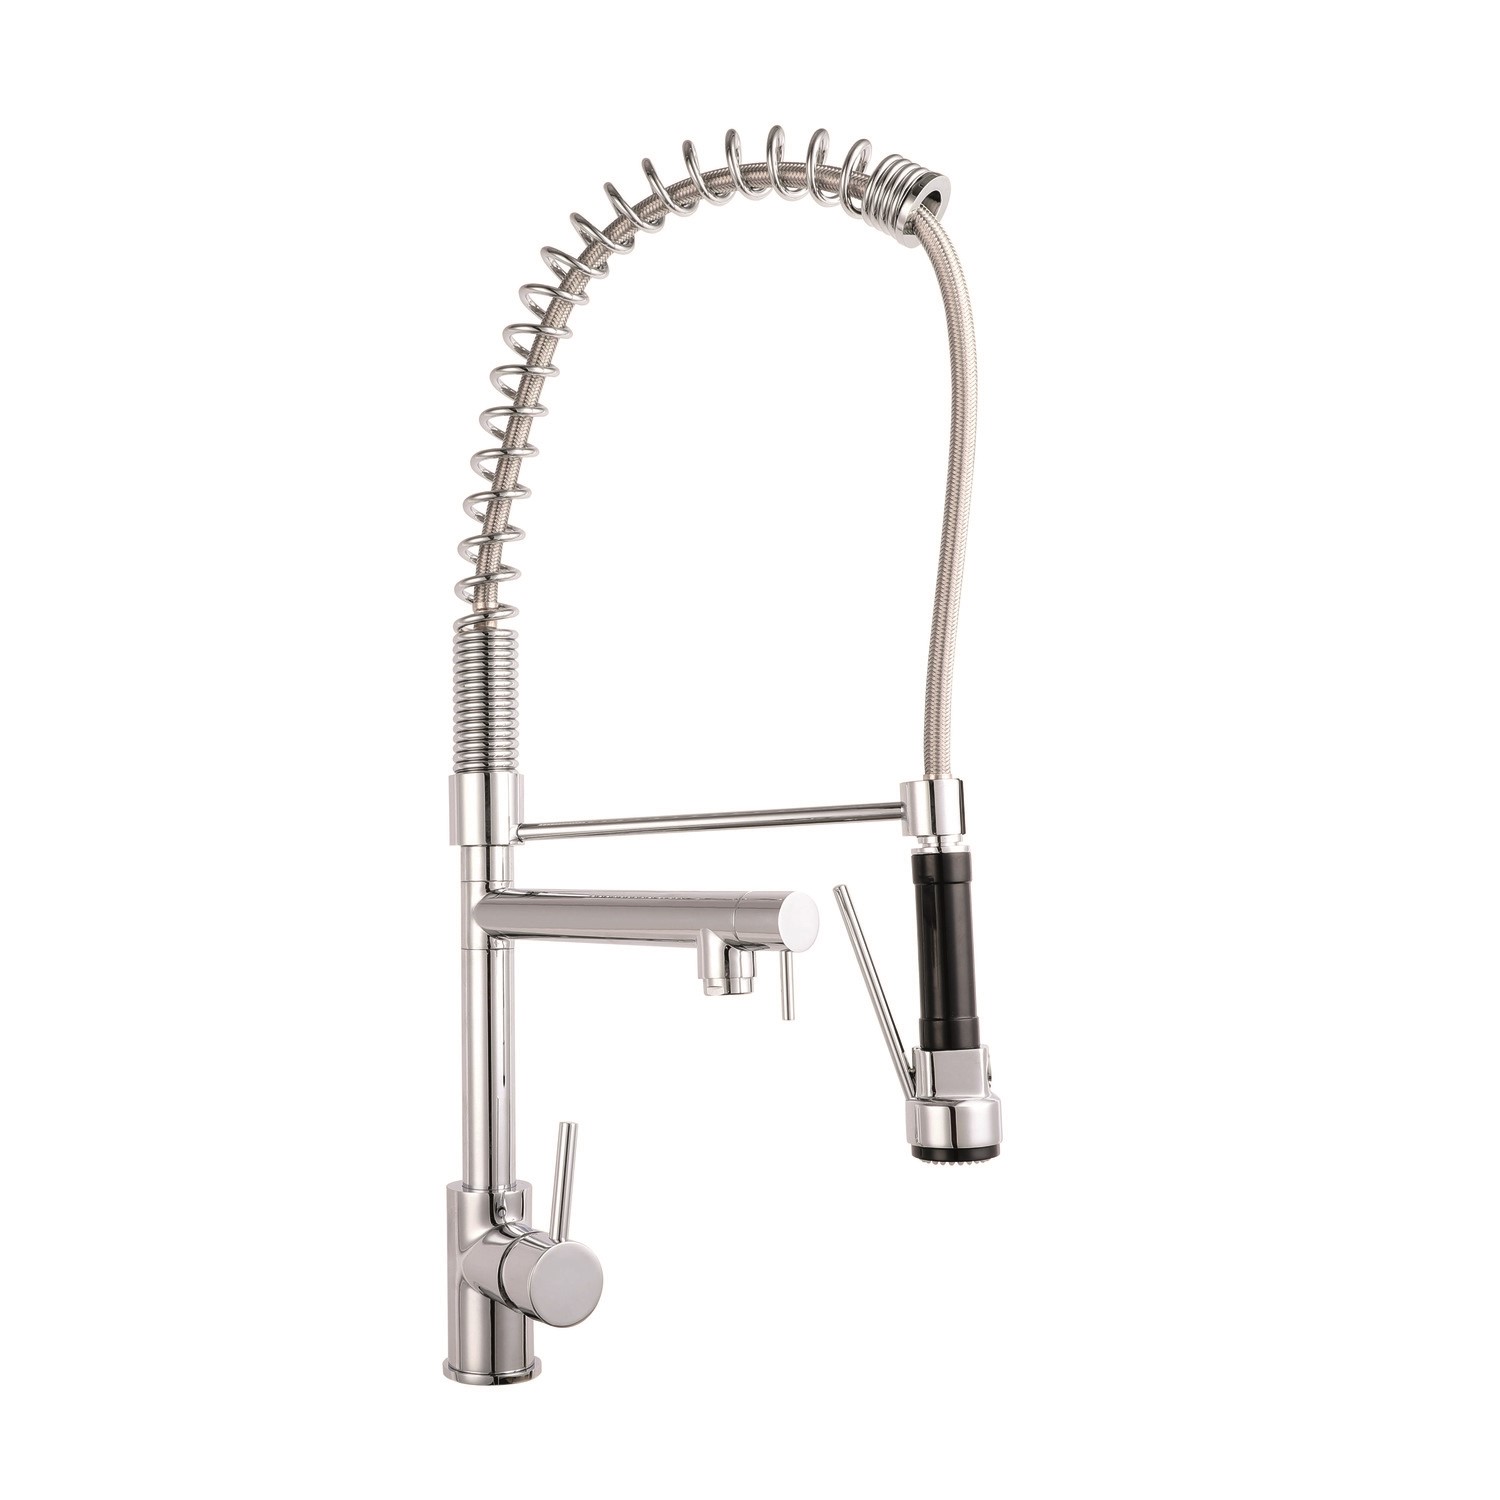 Reginox Chrome Single Lever Kitchen Mixer Tap with Pull Out Spray - Ariege CH